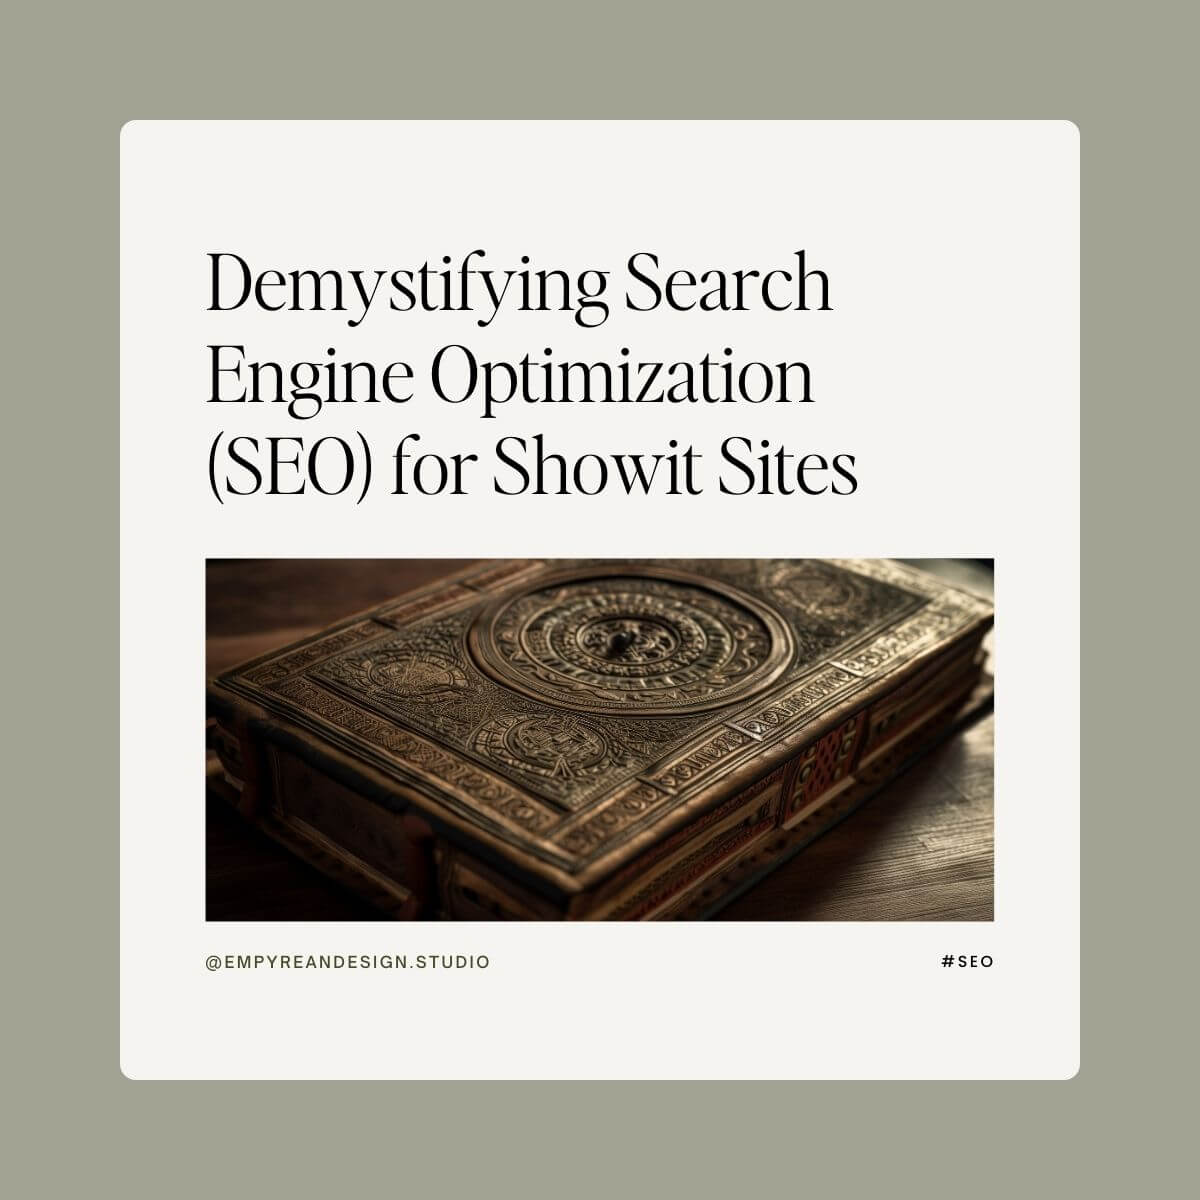 Demystifying-Search-Engine-Optimization-Showit-Sites